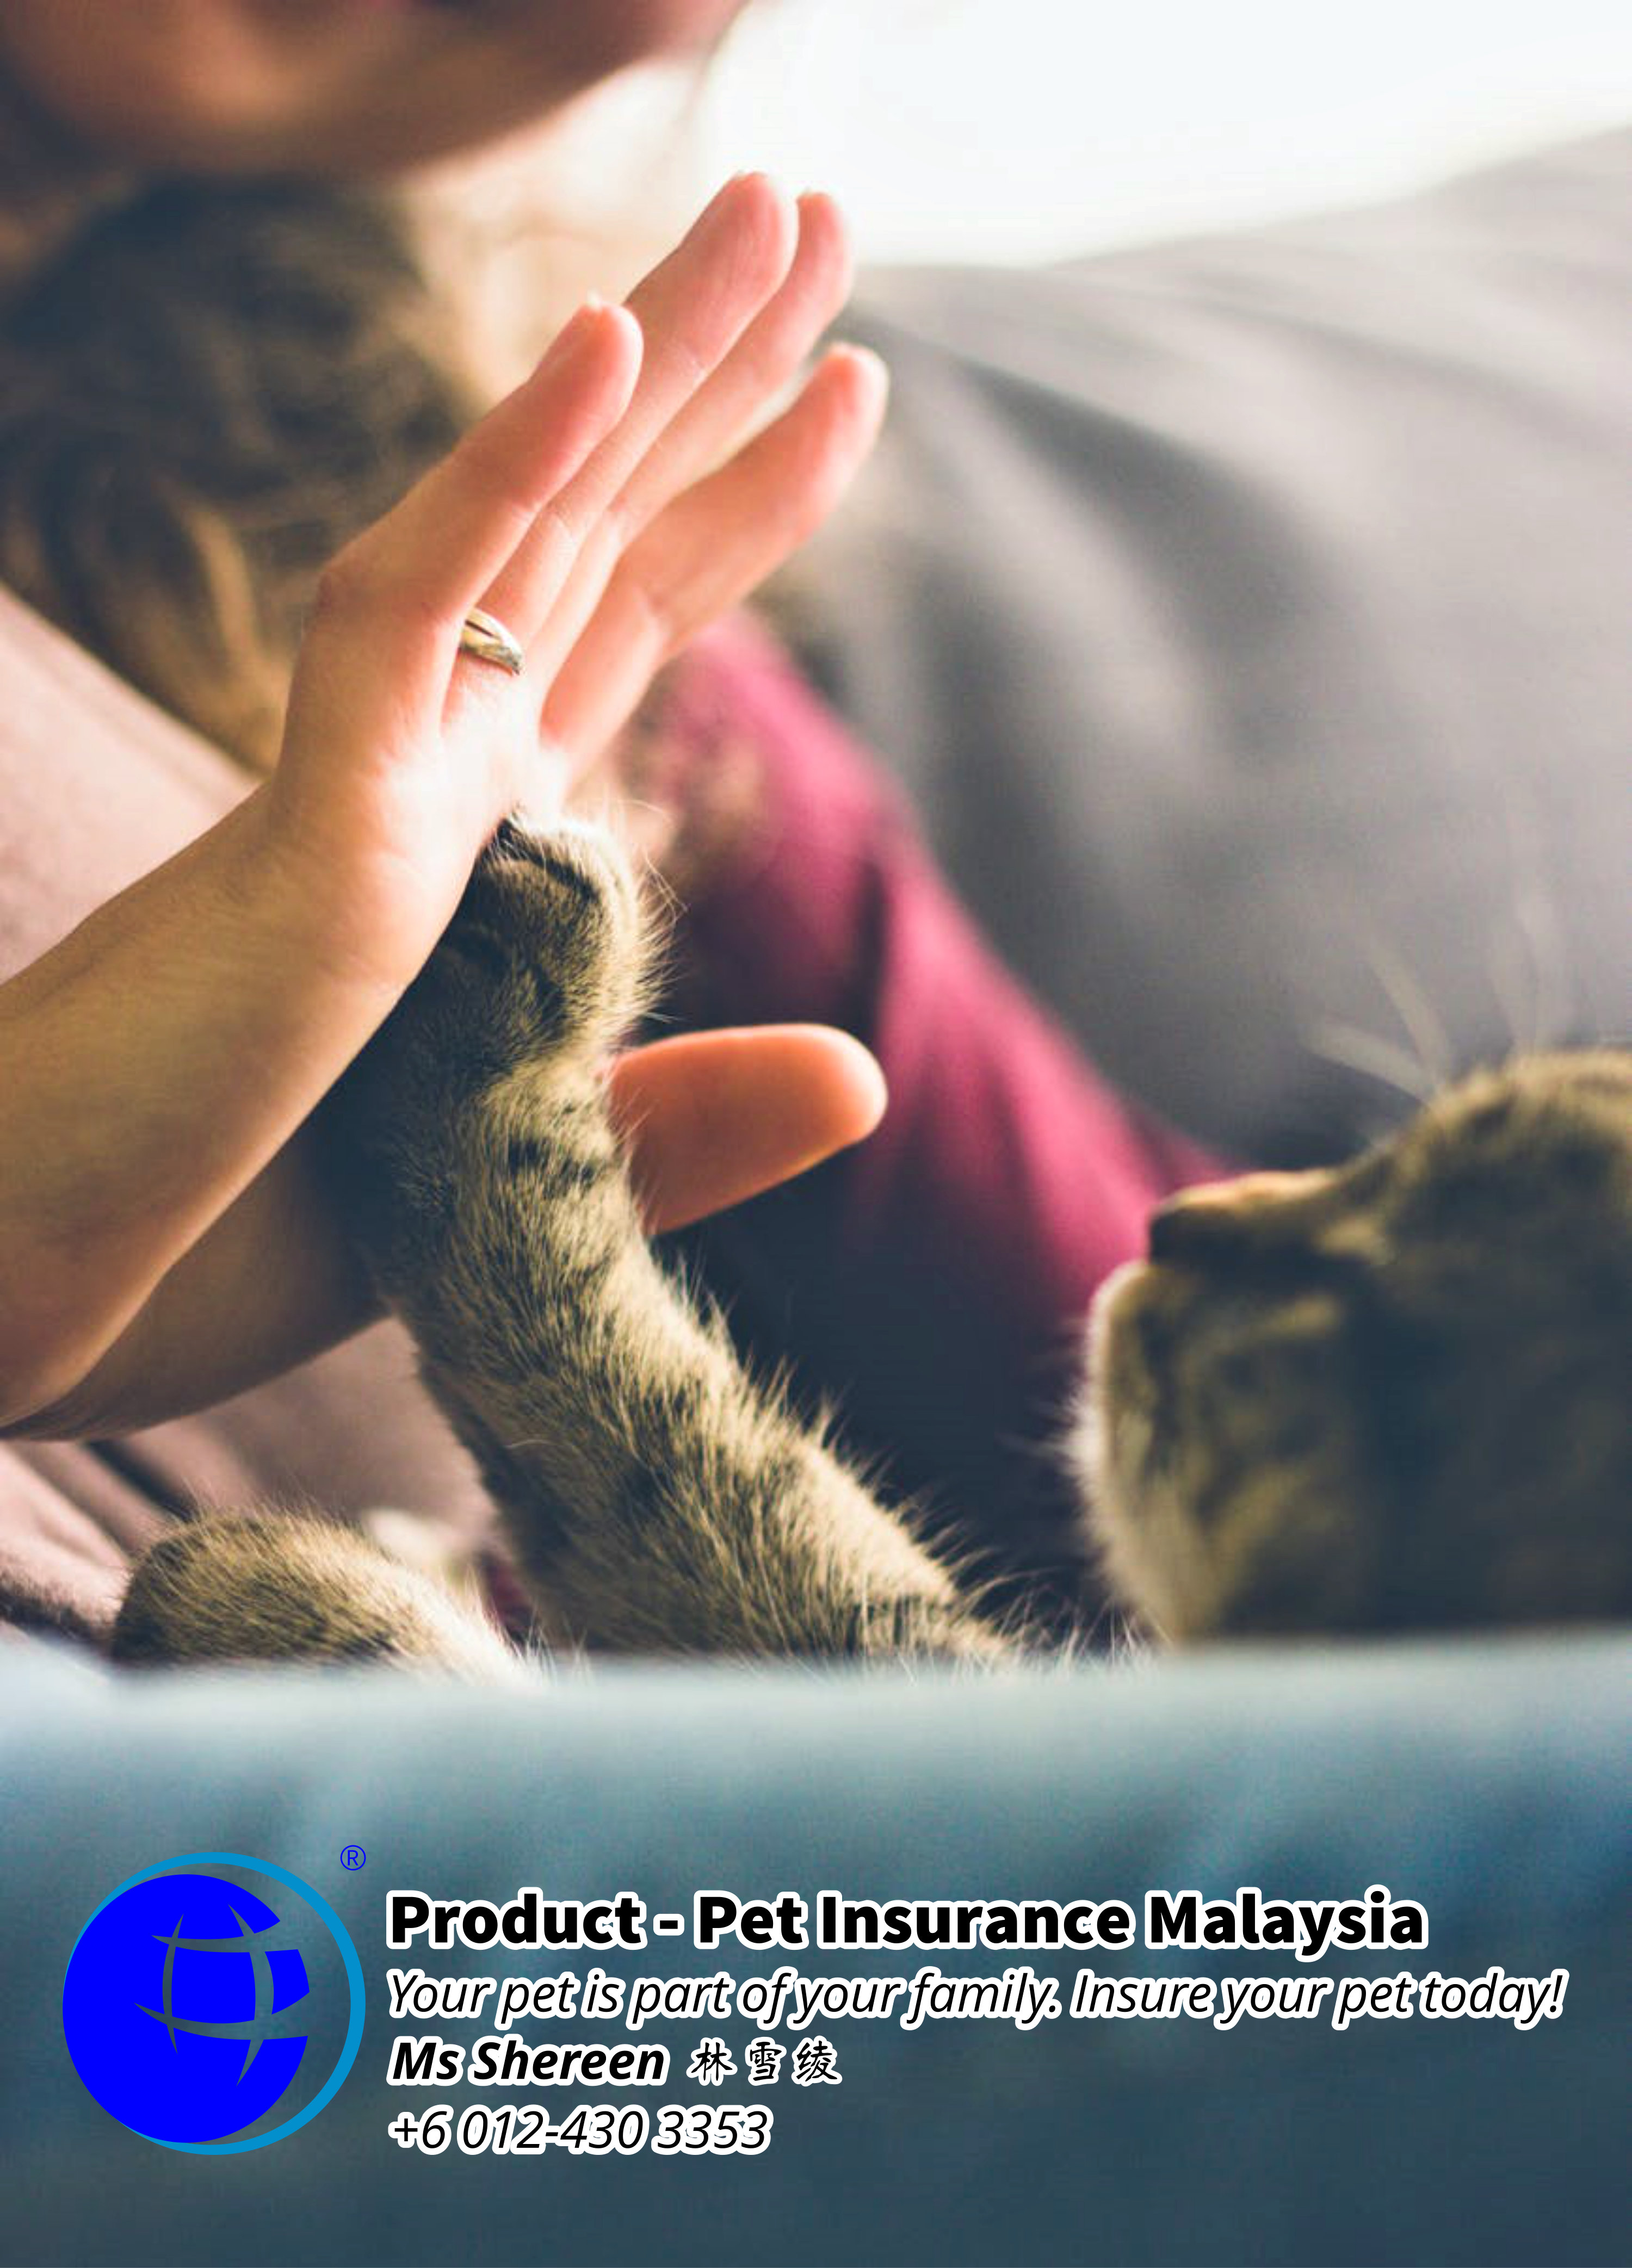 Pet Insurance Malaysia Johor Batu Pahat Agensi Pekerjaan Unilink Prospects SB Wisma V Cat Insurance Malaysia Dog Insurance Malaysia Johor Batu Pahat Your pet is part of your family Insure your pet today A08